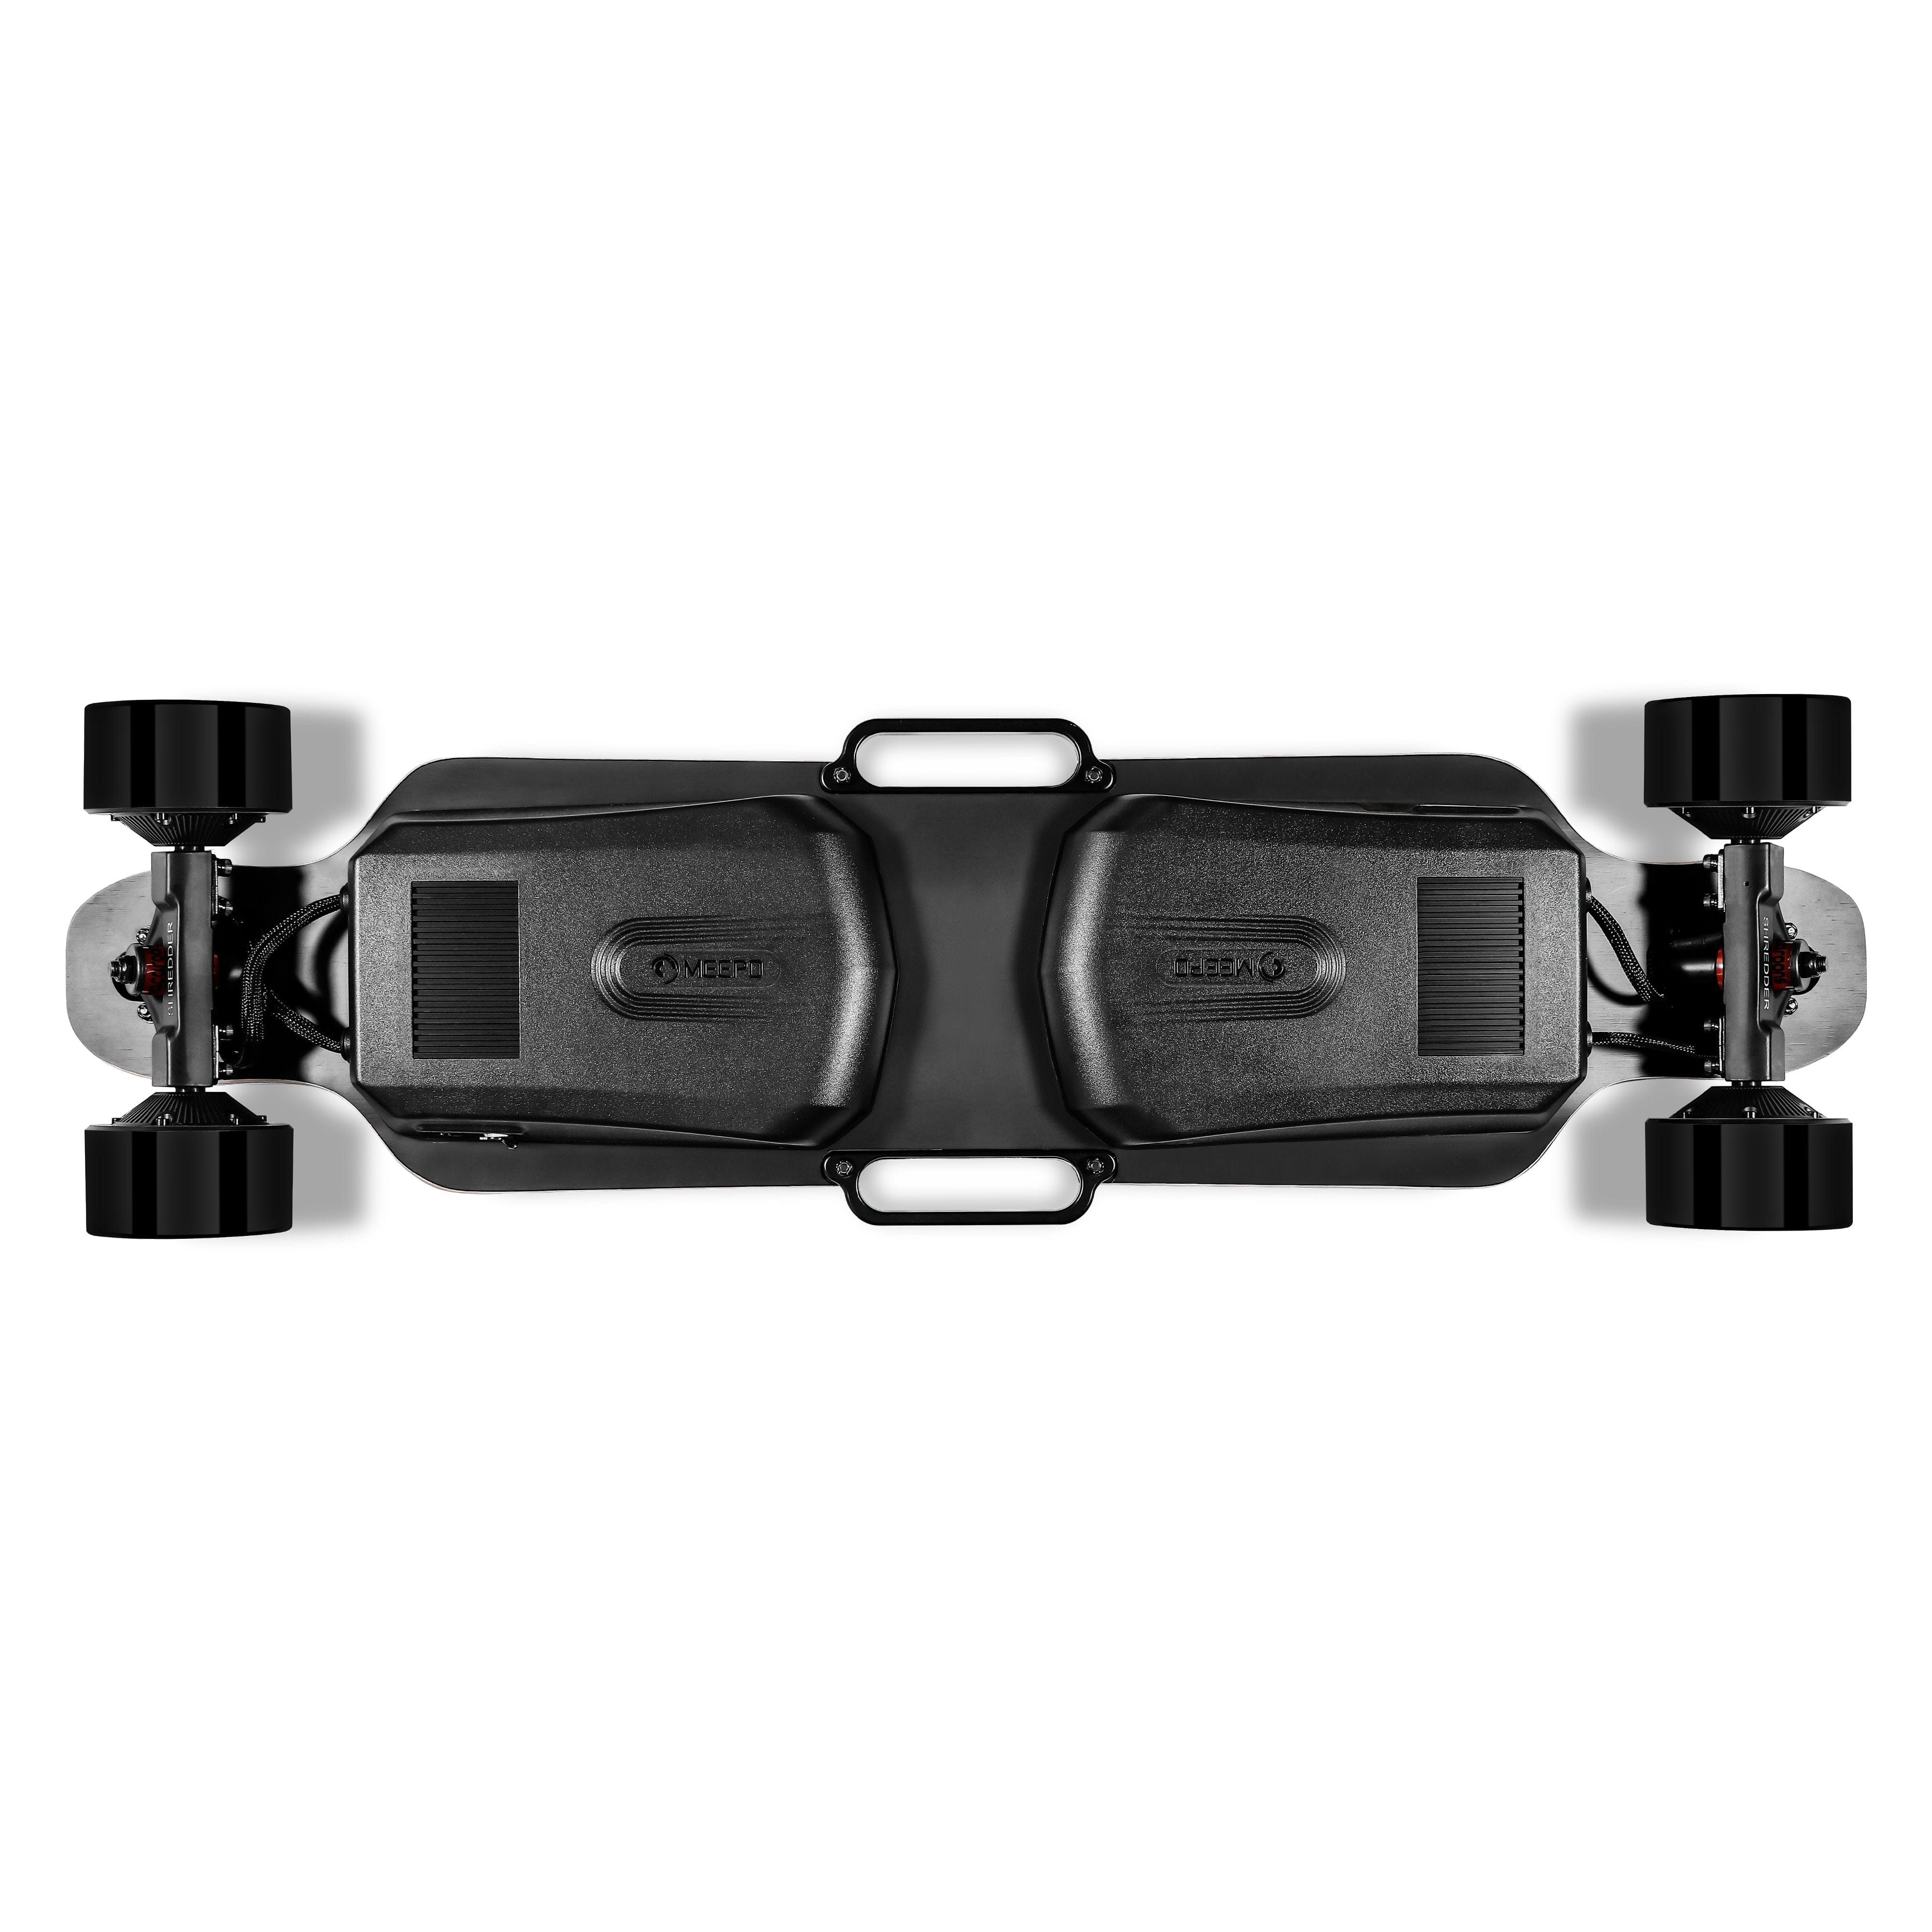 Meepo Board AWD-Pro - Under Deck View of AWD ESC, Battery, Handles, Wheels